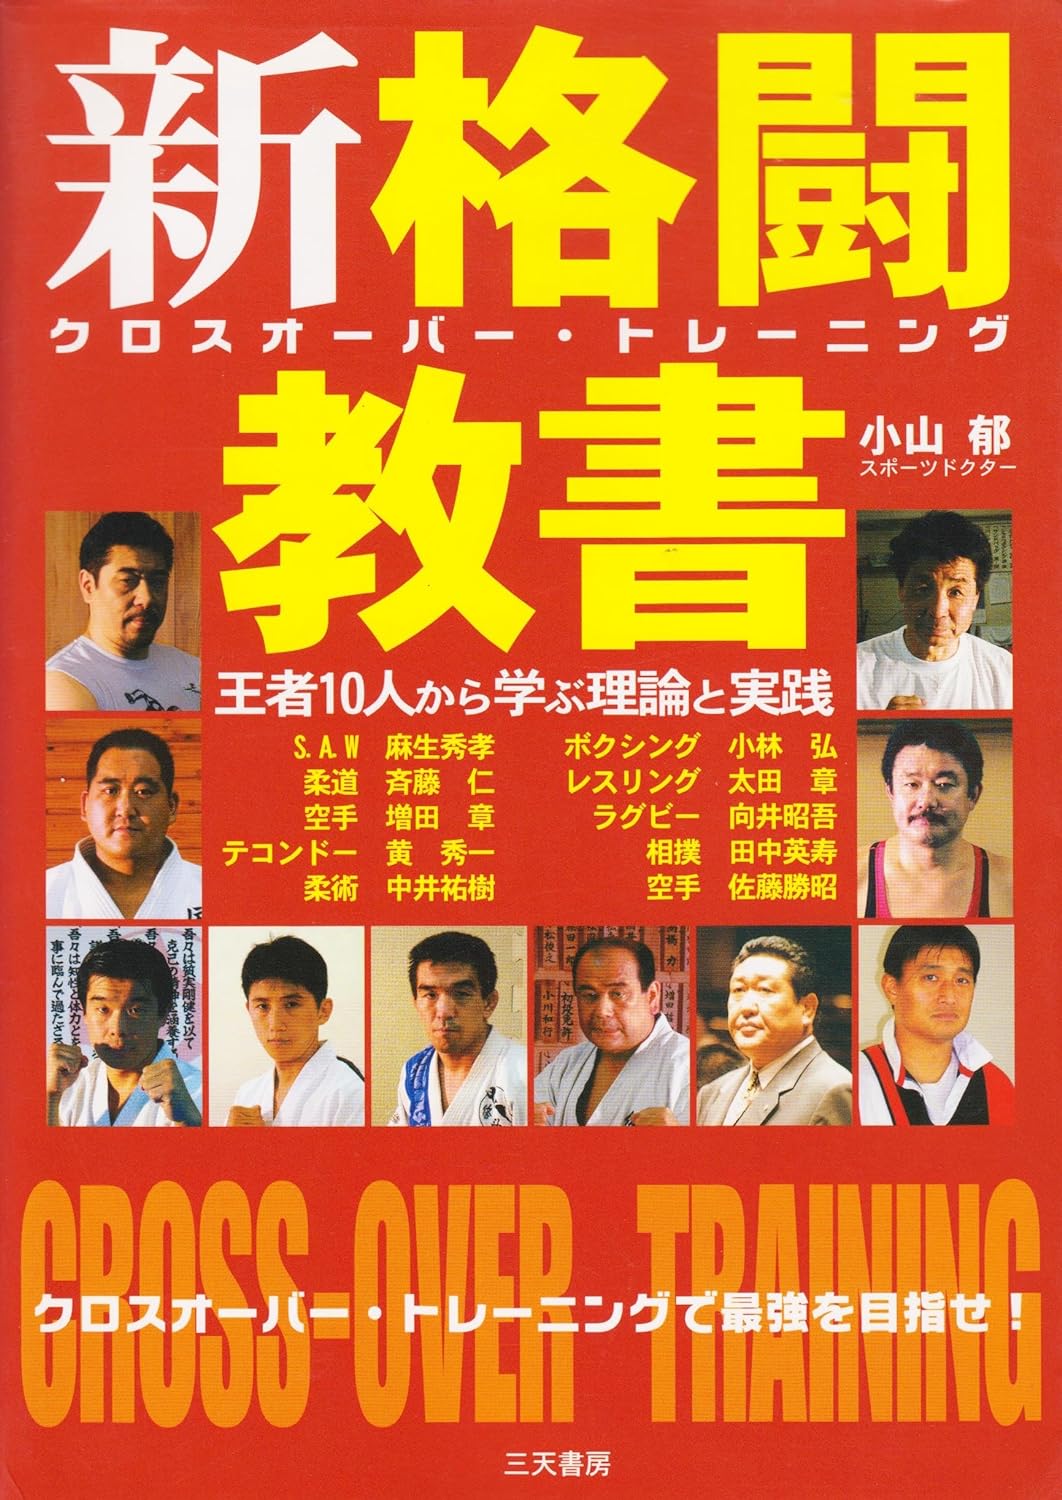 Crossover Training: Theory & Practice Learned from 10 Champions Book by Iku Koyama (Preowned)